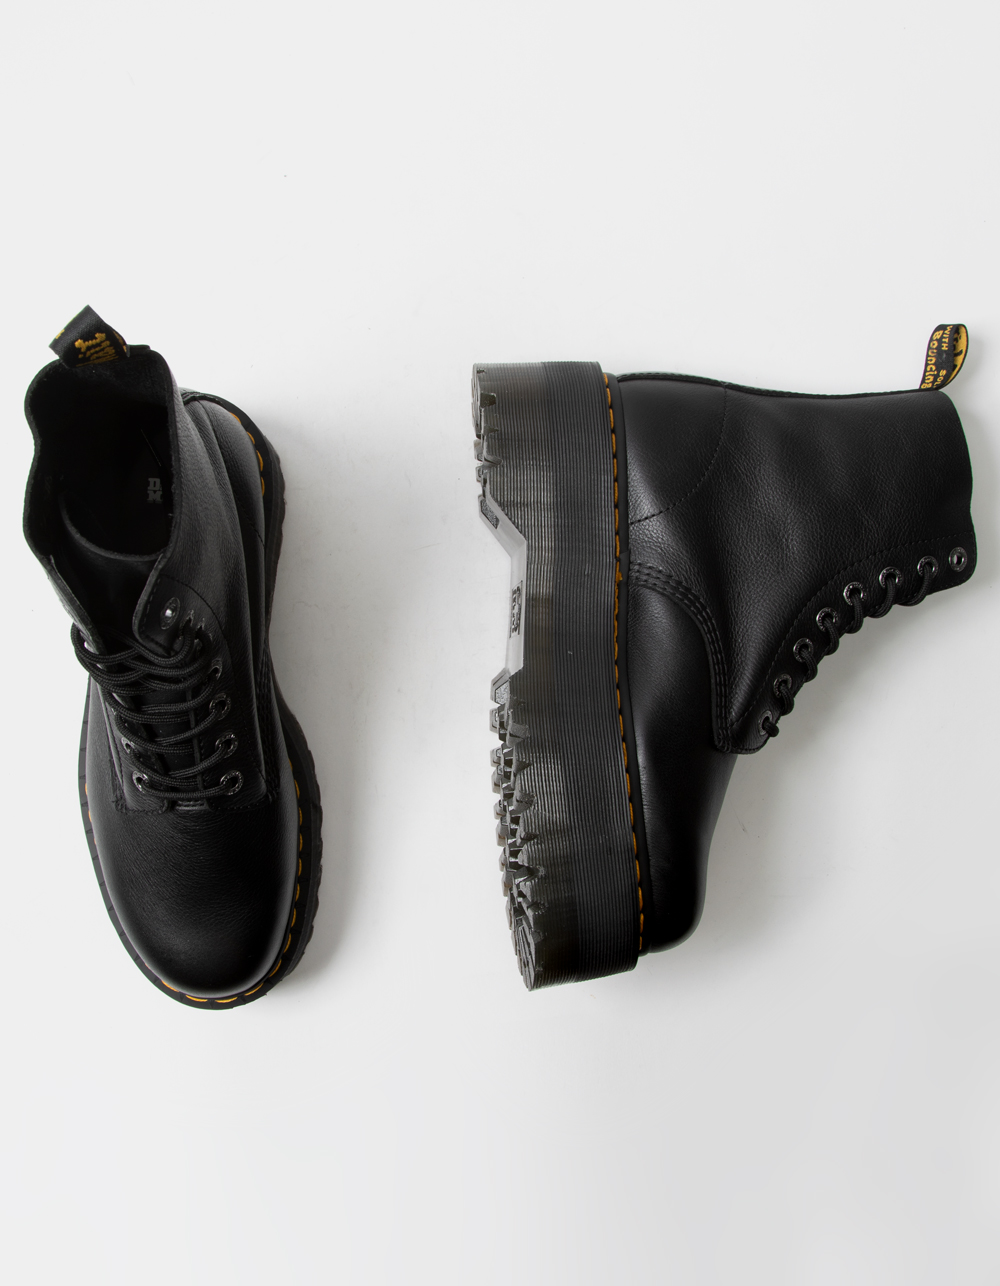 Stratford on Avon Aditivo Noroeste DR. MARTENS 1460 Pascal Max Womens Boots - BLACK | Tillys